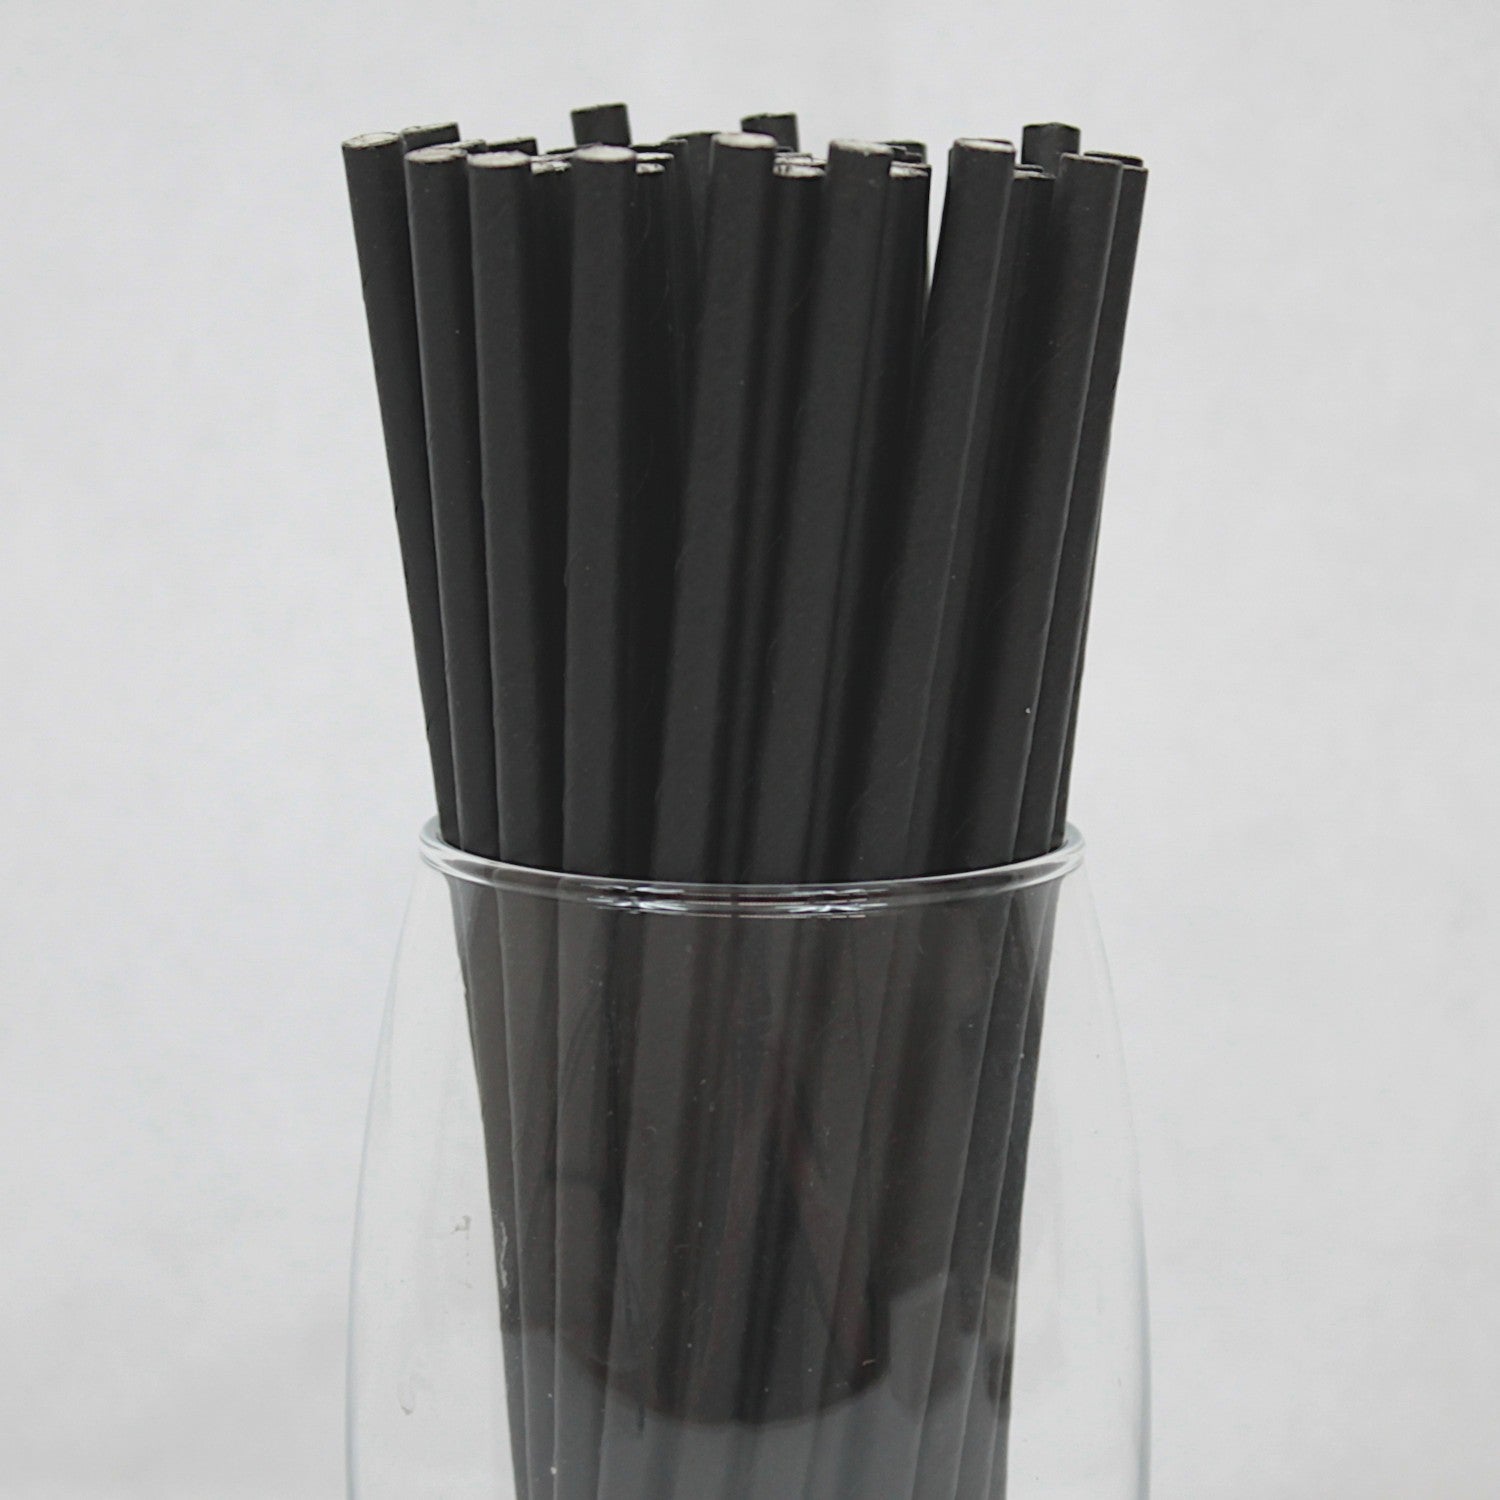 Individually Wrapped Black Paper Straws (6mm x 200mm) - Intrinsic Paper Straws